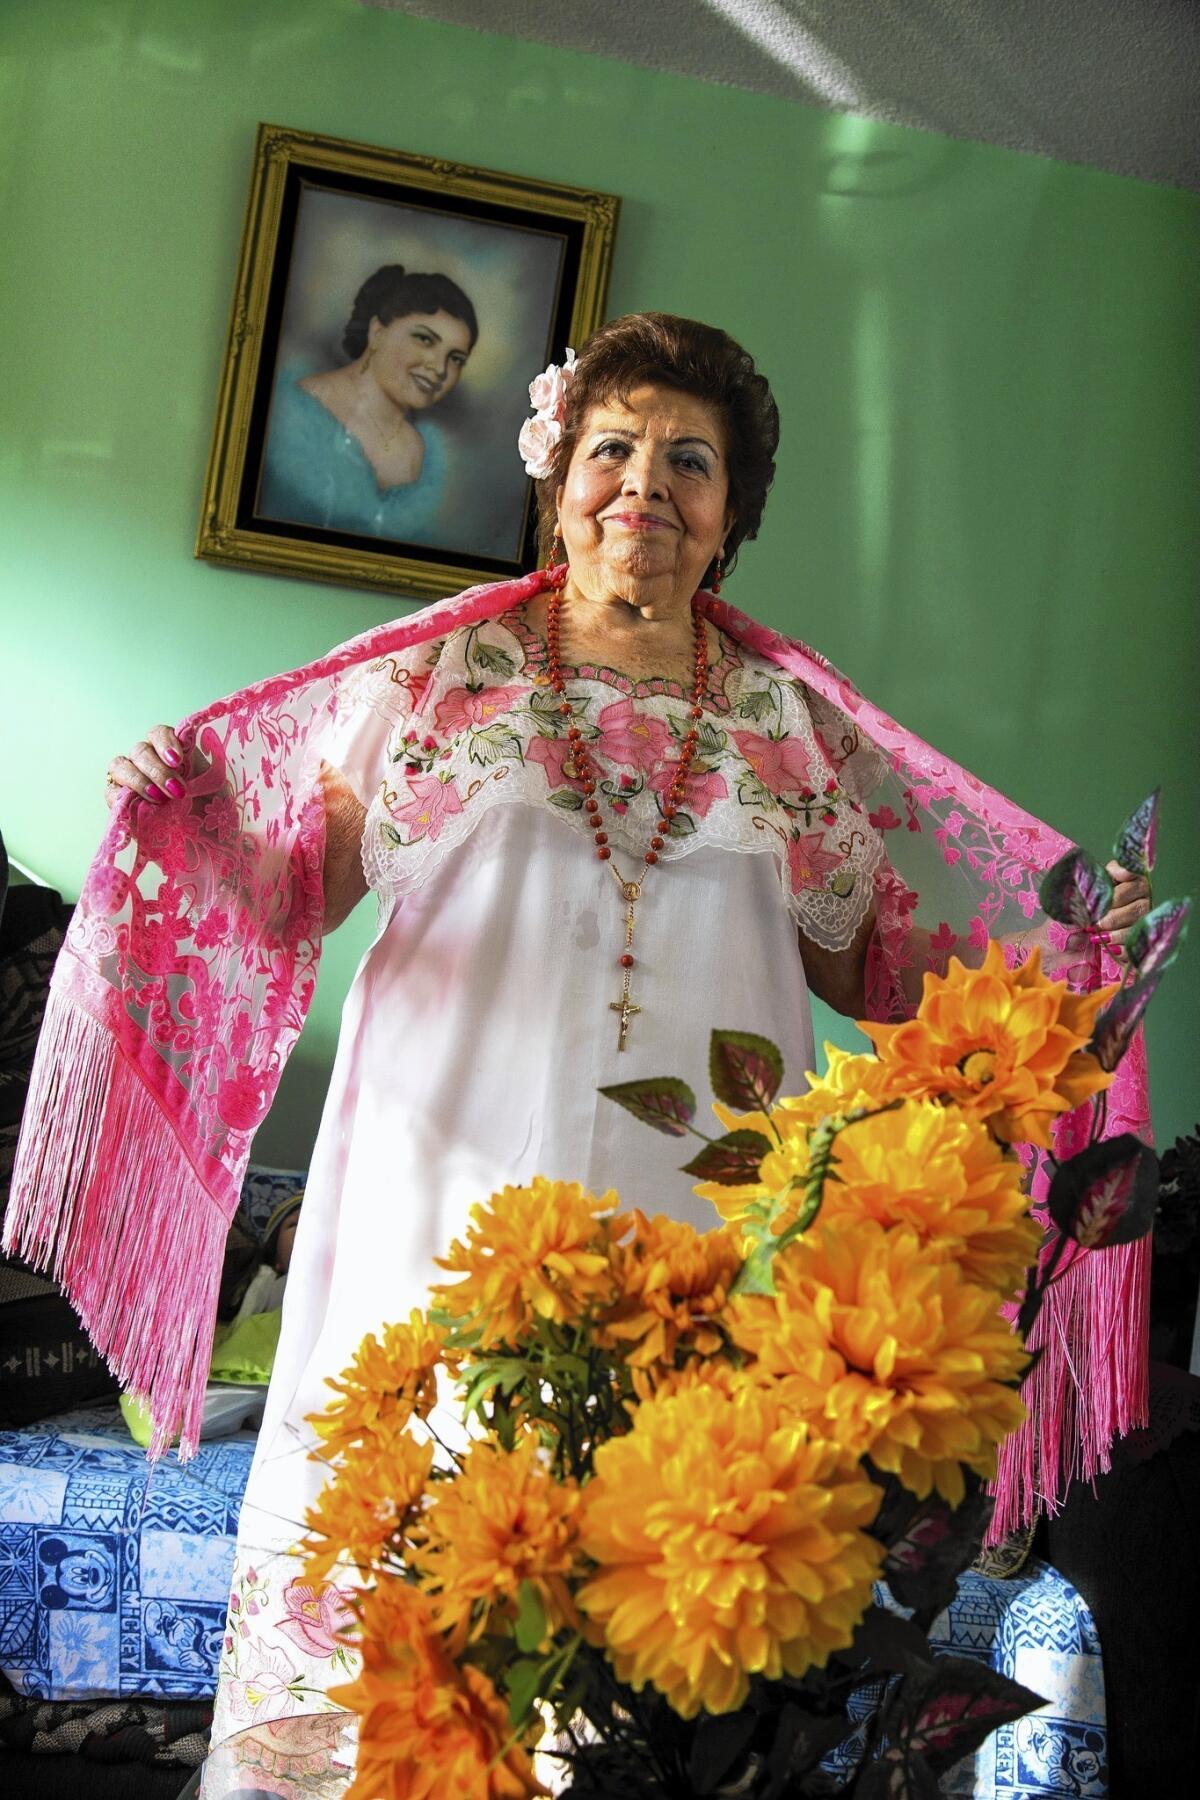 Francis Angulo, 83, spent 12 years performing with an all-female mariachi group formed in 1948. She is featured in an exhibit on female mariachis at the San Gabriel Mission Playhouse.